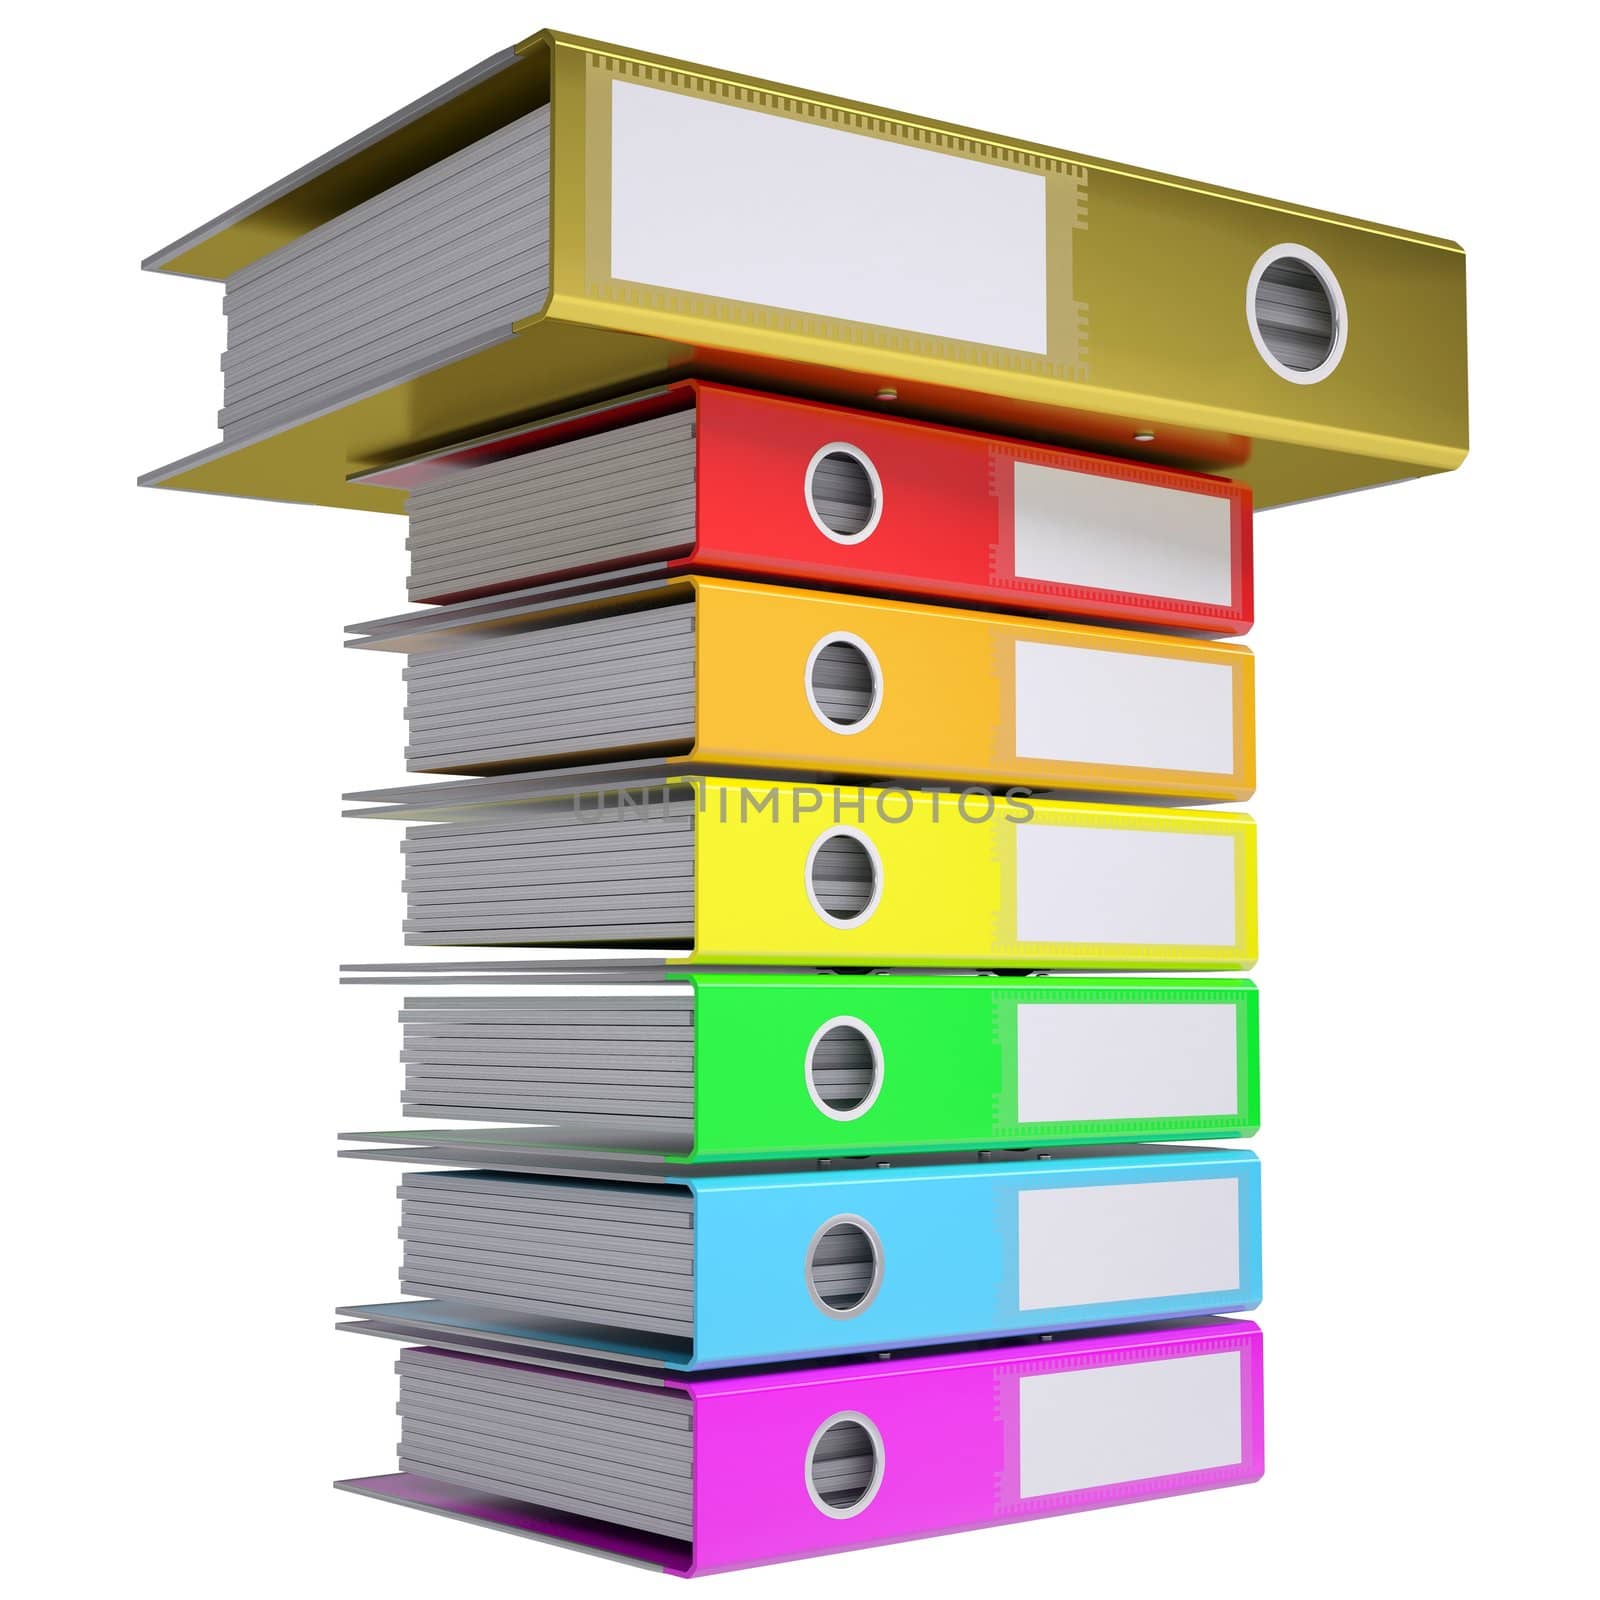 A stack of office folders, folder golden on top. Isolated render on a white background